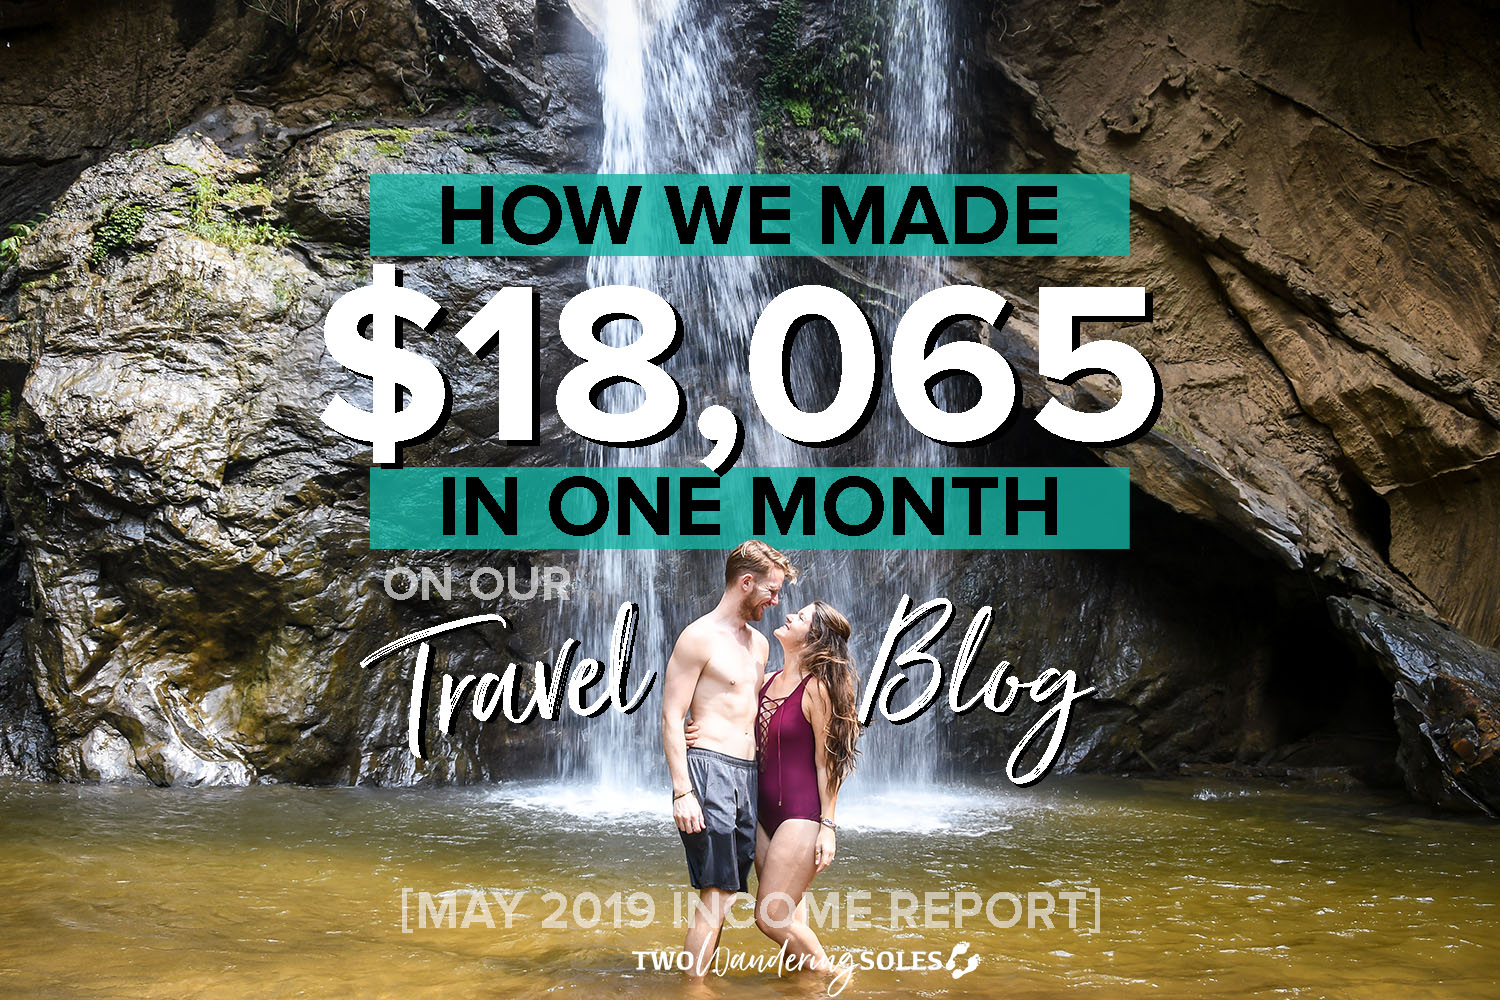 Travel Blog Income Report May 2019 Two Wandering Soles